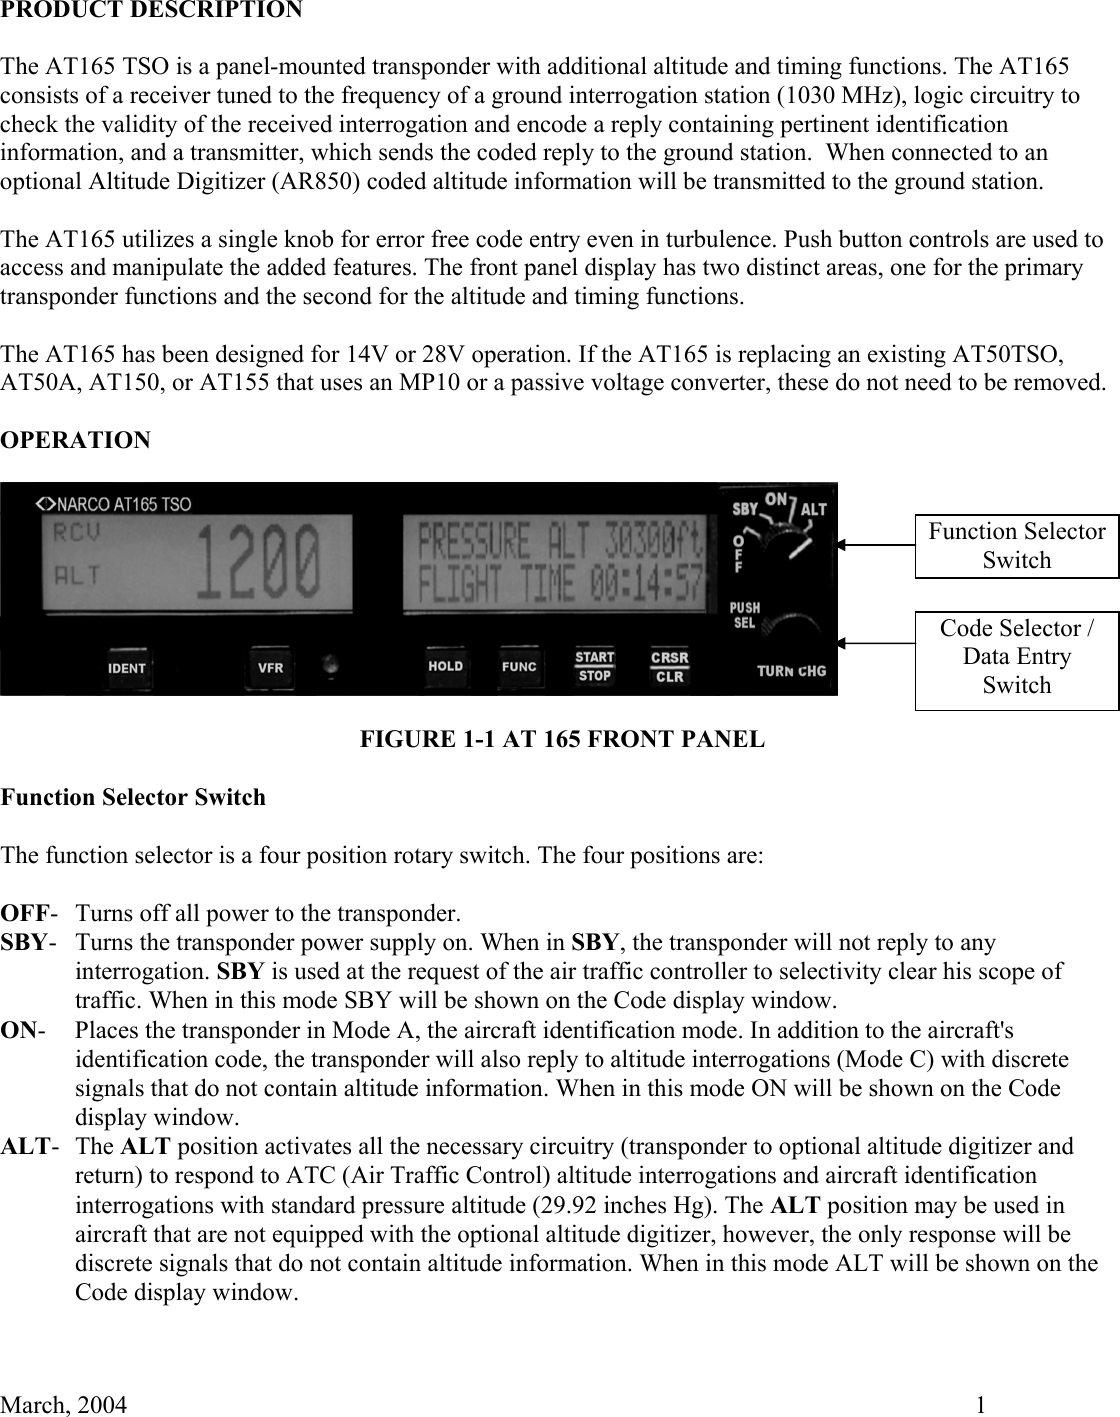   March, 2004    1 PRODUCT DESCRIPTION  The AT165 TSO is a panel-mounted transponder with additional altitude and timing functions. The AT165 consists of a receiver tuned to the frequency of a ground interrogation station (1030 MHz), logic circuitry to check the validity of the received interrogation and encode a reply containing pertinent identification information, and a transmitter, which sends the coded reply to the ground station.  When connected to an optional Altitude Digitizer (AR850) coded altitude information will be transmitted to the ground station.  The AT165 utilizes a single knob for error free code entry even in turbulence. Push button controls are used to access and manipulate the added features. The front panel display has two distinct areas, one for the primary transponder functions and the second for the altitude and timing functions.  The AT165 has been designed for 14V or 28V operation. If the AT165 is replacing an existing AT50TSO, AT50A, AT150, or AT155 that uses an MP10 or a passive voltage converter, these do not need to be removed.  OPERATION    FIGURE 1-1 AT 165 FRONT PANEL  Function Selector Switch  The function selector is a four position rotary switch. The four positions are:  OFF-  Turns off all power to the transponder. SBY-  Turns the transponder power supply on. When in SBY, the transponder will not reply to any interrogation. SBY is used at the request of the air traffic controller to selectivity clear his scope of traffic. When in this mode SBY will be shown on the Code display window. ON-  Places the transponder in Mode A, the aircraft identification mode. In addition to the aircraft&apos;s identification code, the transponder will also reply to altitude interrogations (Mode C) with discrete signals that do not contain altitude information. When in this mode ON will be shown on the Code display window. ALT- The ALT position activates all the necessary circuitry (transponder to optional altitude digitizer and return) to respond to ATC (Air Traffic Control) altitude interrogations and aircraft identification interrogations with standard pressure altitude (29.92 inches Hg). The ALT position may be used in aircraft that are not equipped with the optional altitude digitizer, however, the only response will be discrete signals that do not contain altitude information. When in this mode ALT will be shown on the Code display window.   Function Selector Switch Code Selector / Data Entry  Switch 